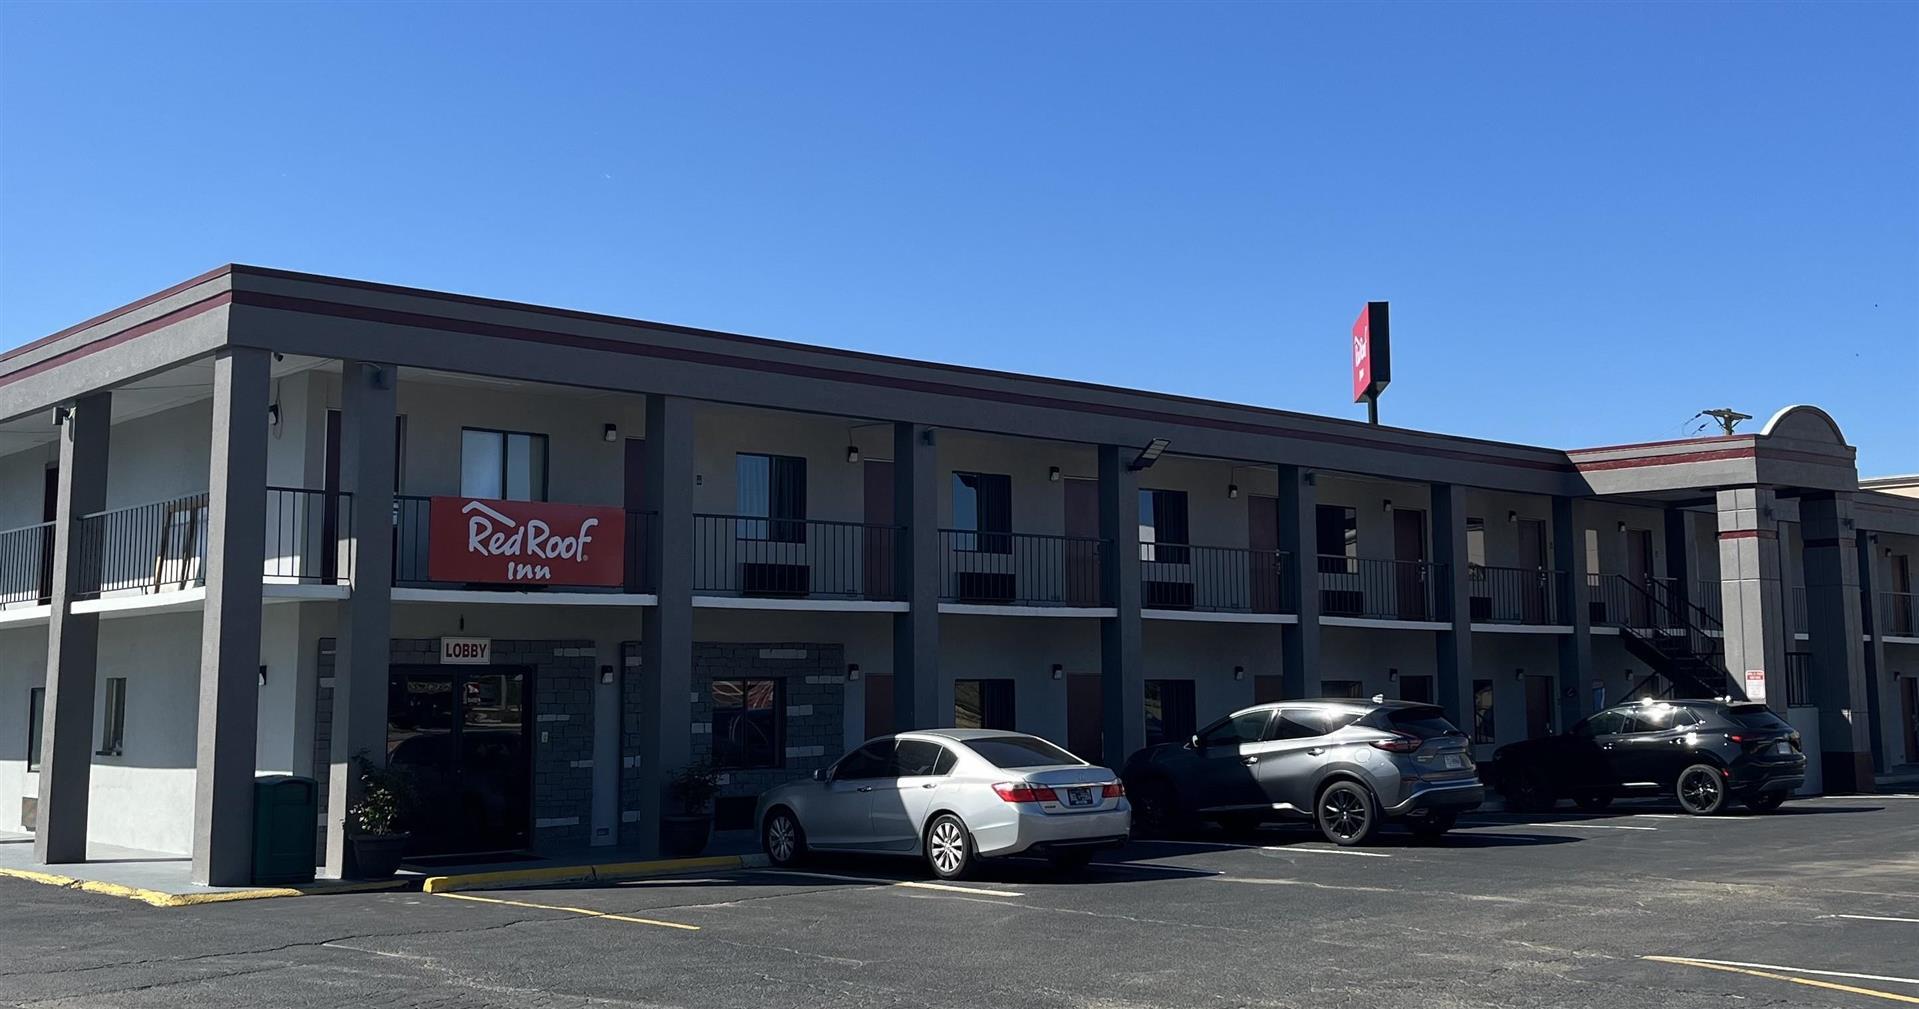 Red Roof Inn Kimball, TN - I-24 in Chattanooga, TN